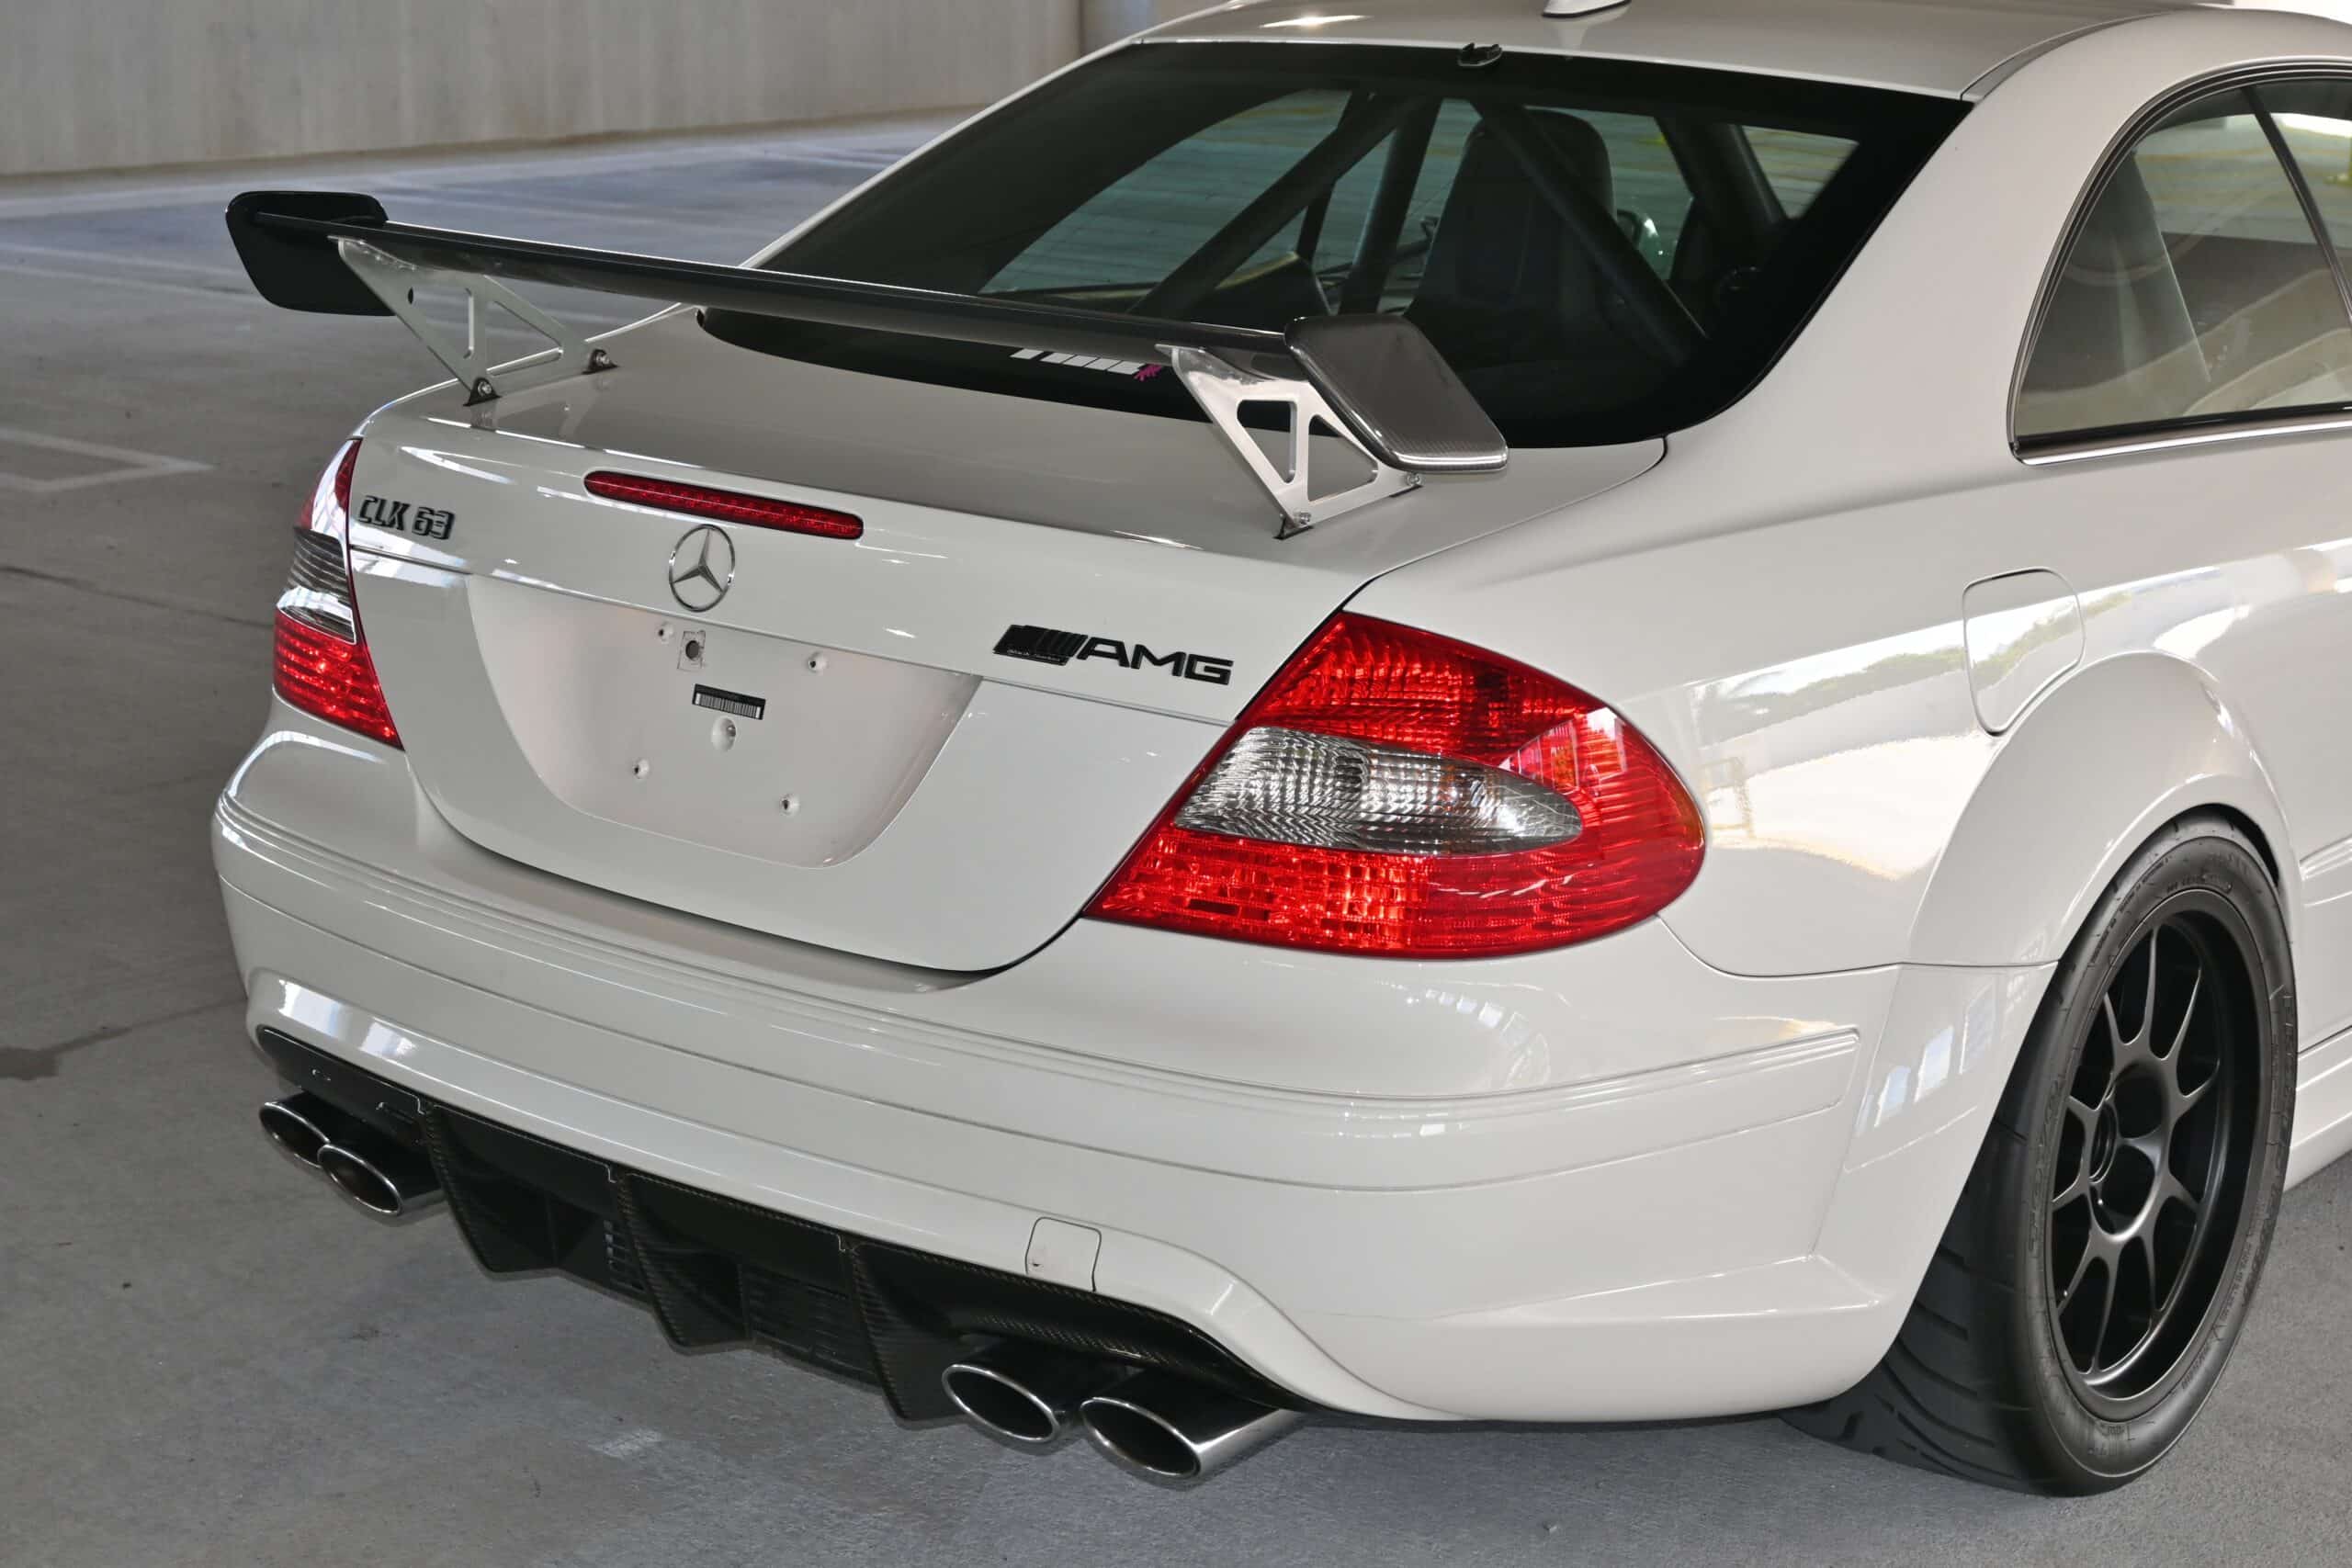 2008 Mercedes-Benz CLK63 Black Series Weistec Supercharged-700HP-Only 23K Miles-Fully Documented-Over $60k in receipts